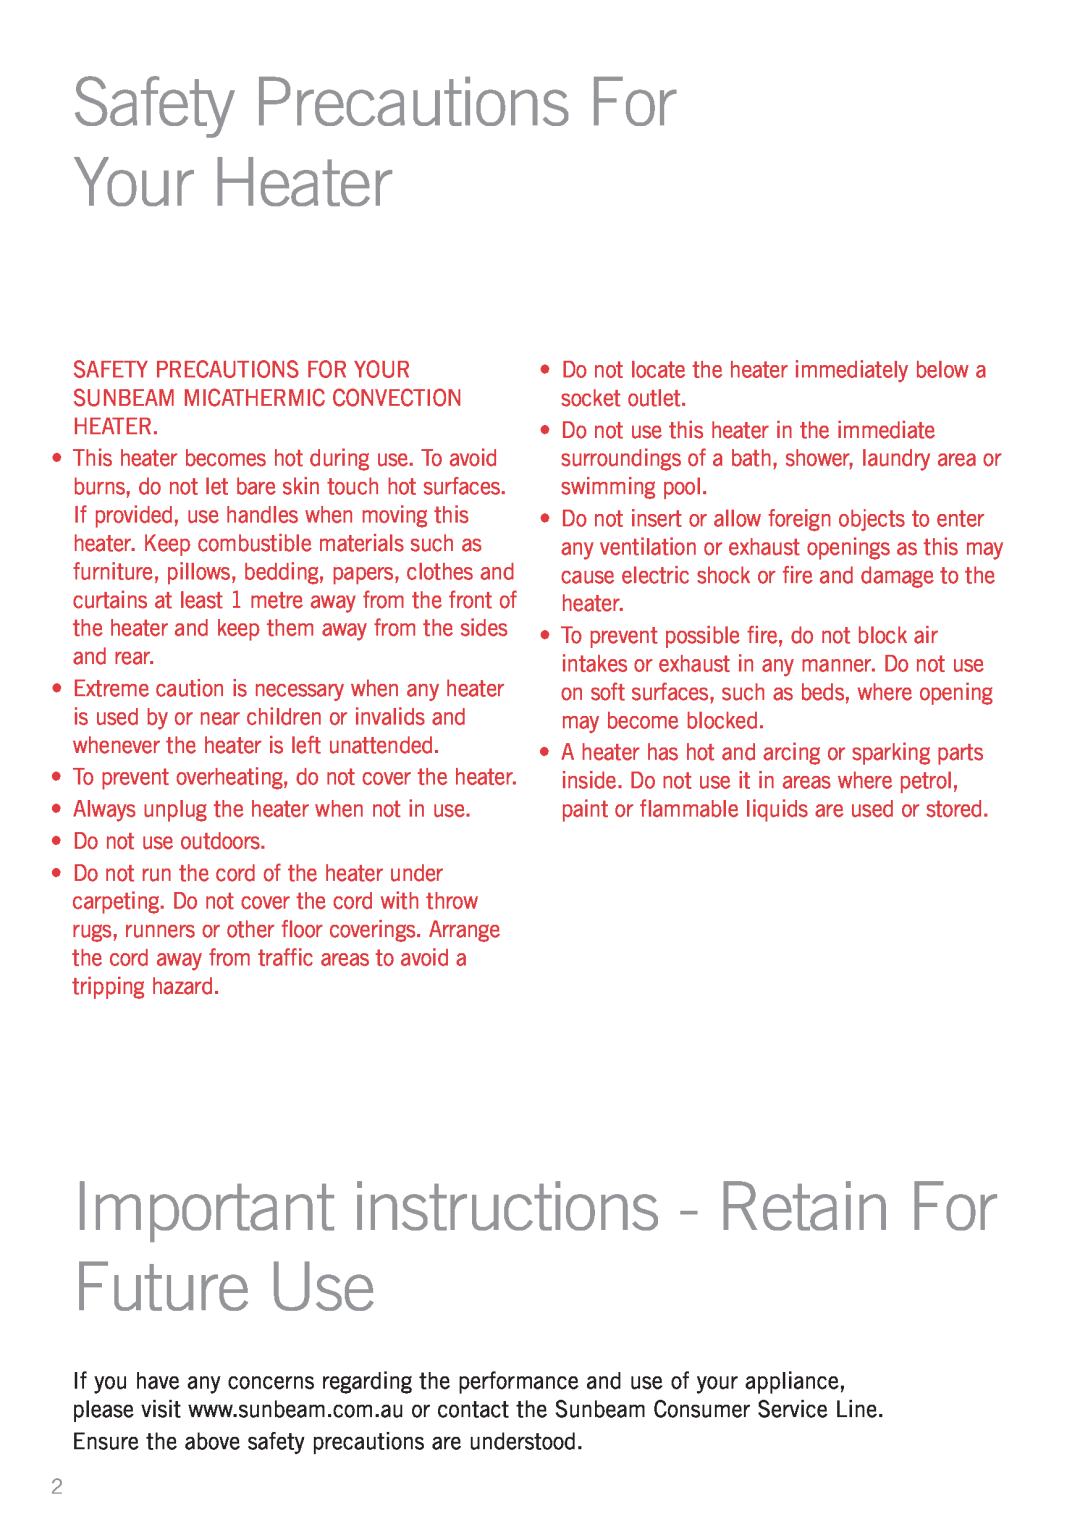 Sunbeam HE4100 manual Safety Precautions For Your Heater, Important instructions - Retain For Future Use 